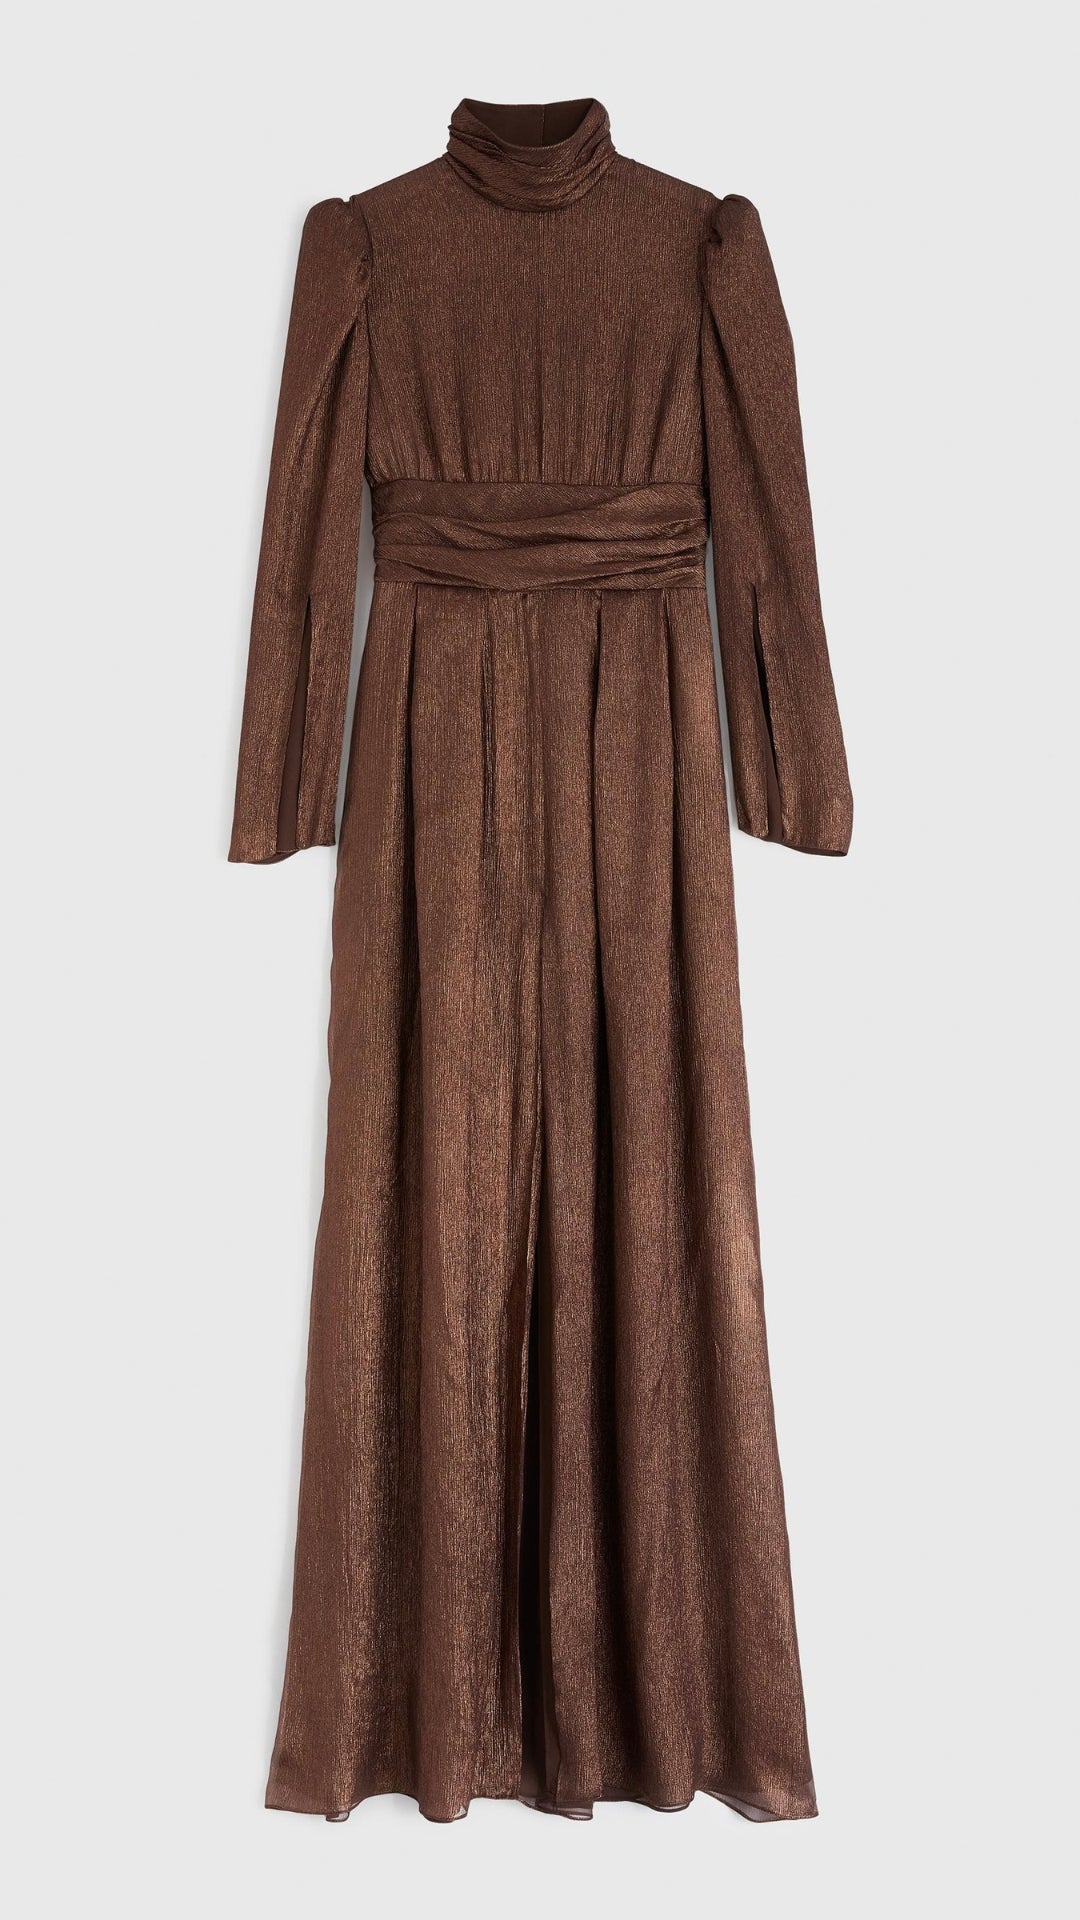 Rochas Paris Lame Creponne Gown. Bronze toned silk lame creponne with a mock neckline, cinched waist and pleated skirt that  falls to the ankle.  This dress has slightly heightened shoulder. A product photo of the gown facing front.